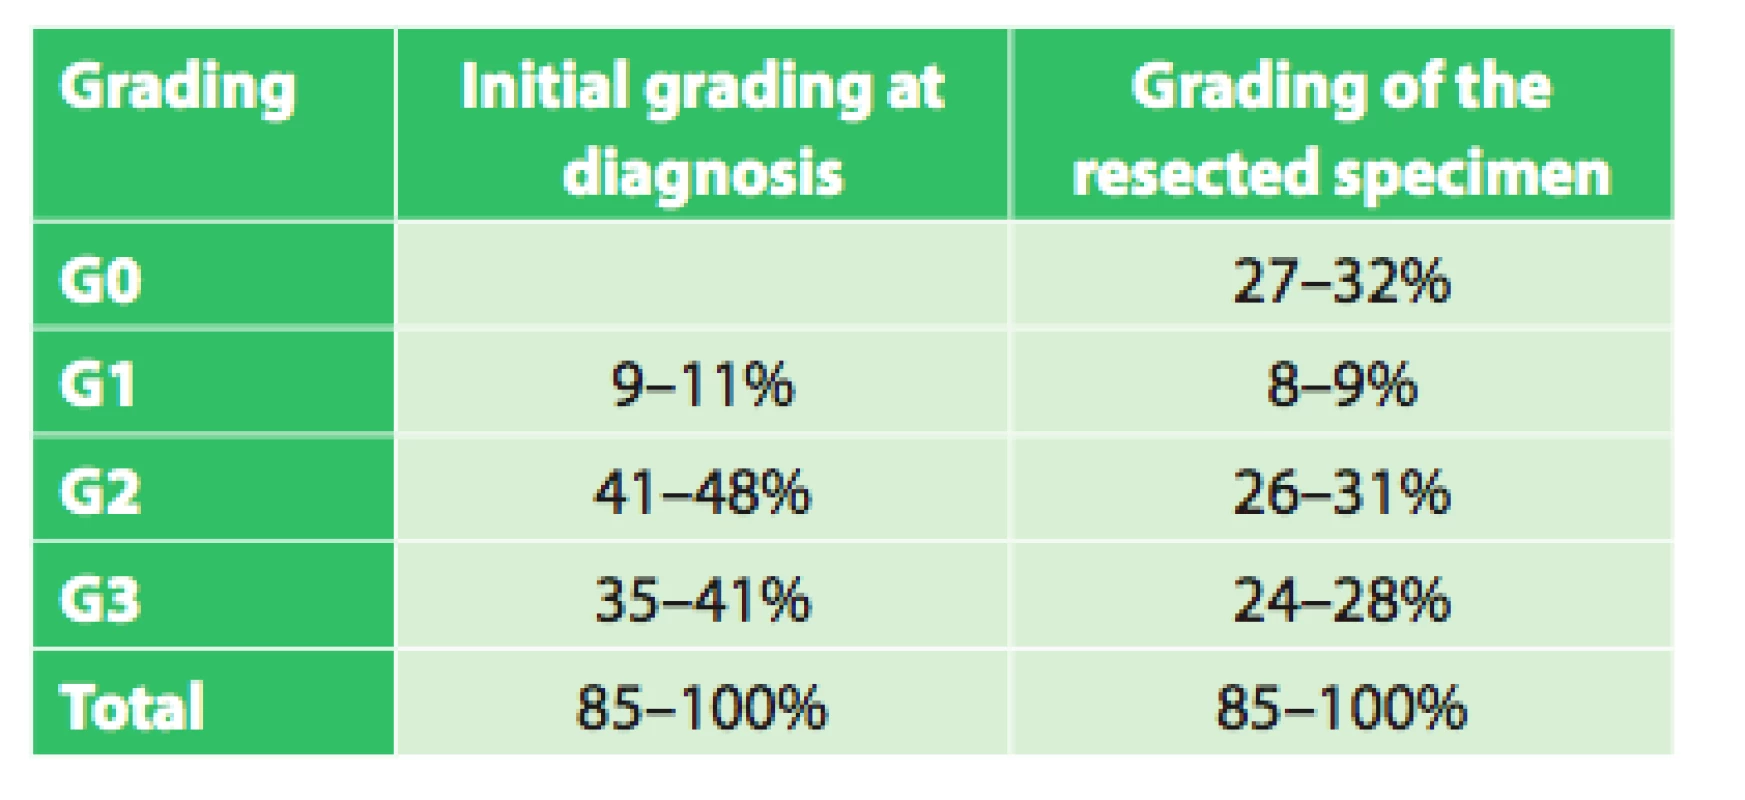 Grading at diagnosis and of the resected specimen in operated patients